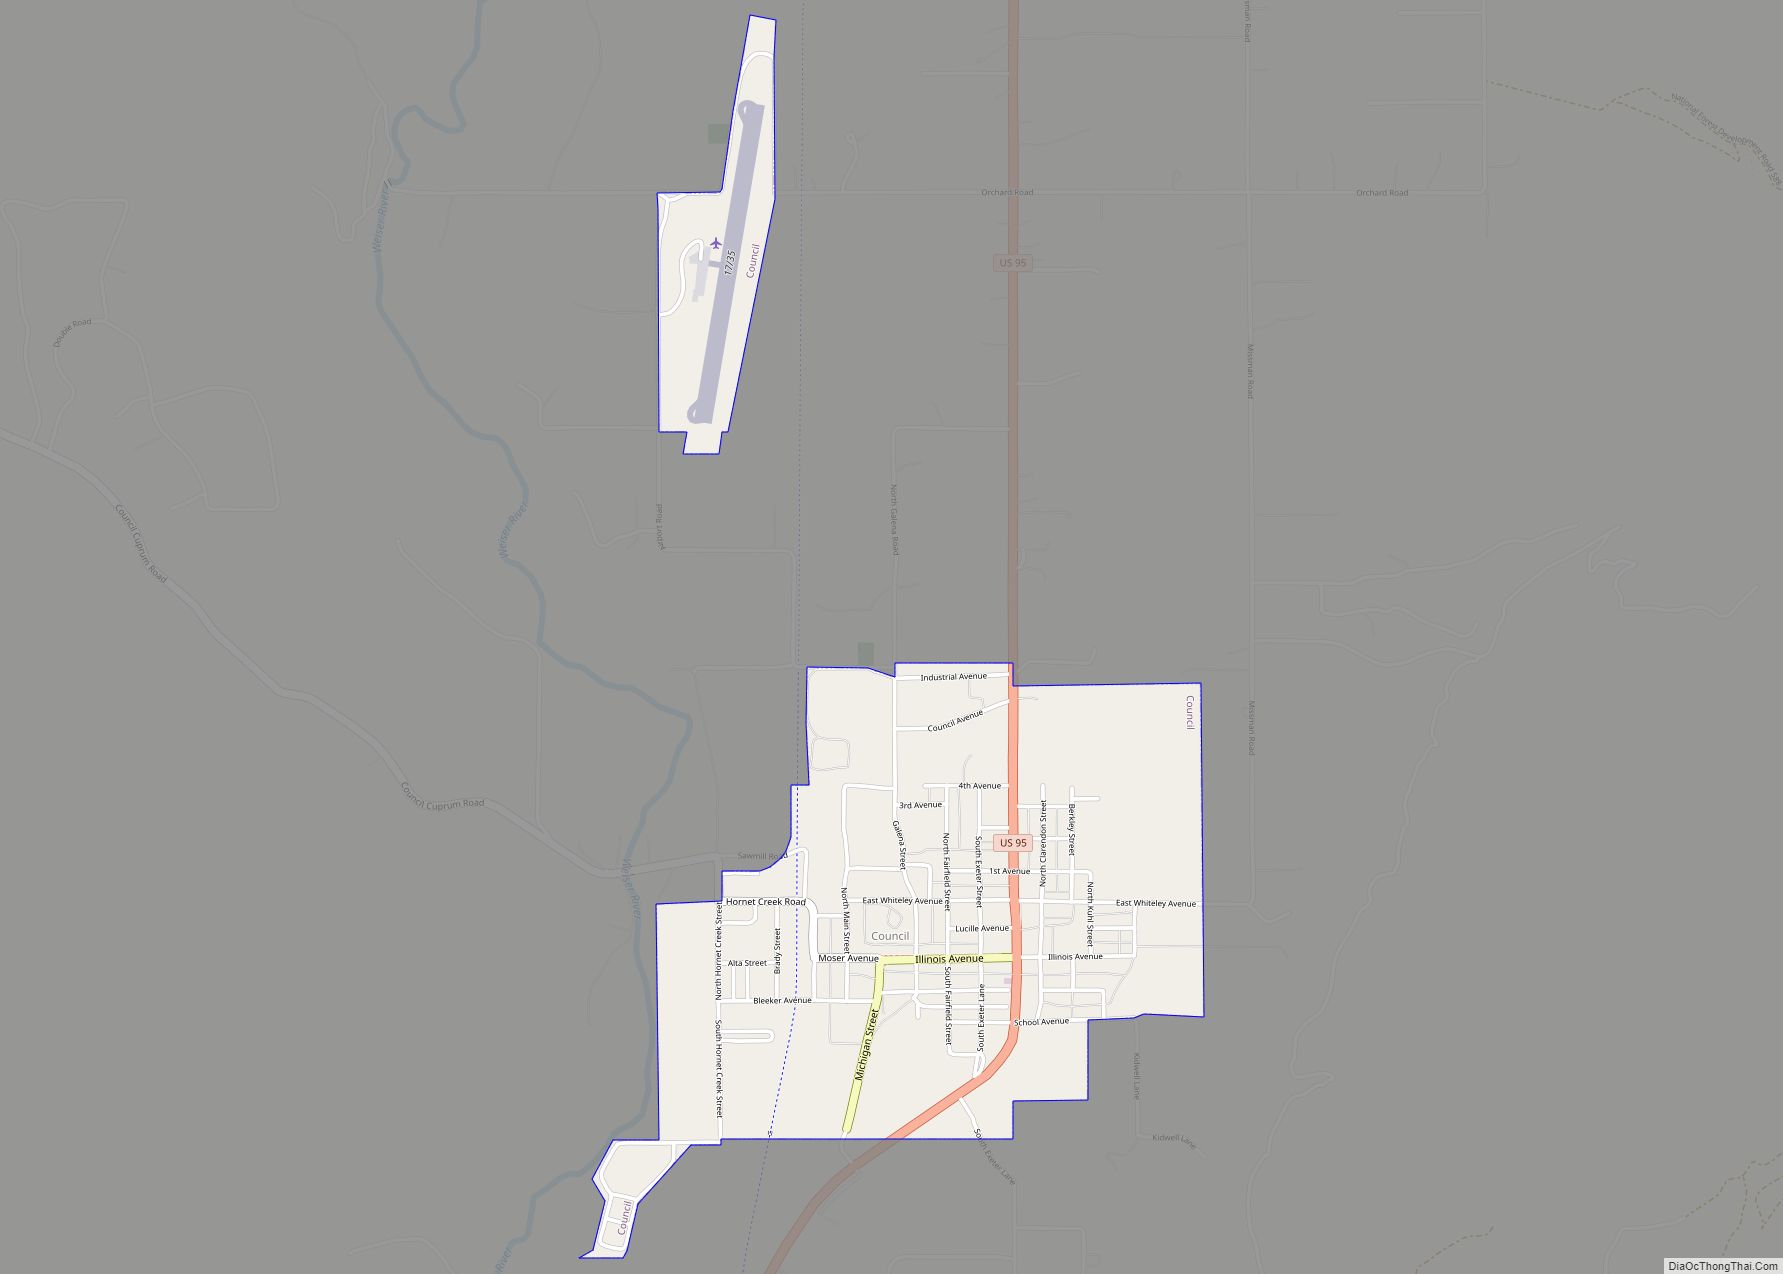 Map of Council city